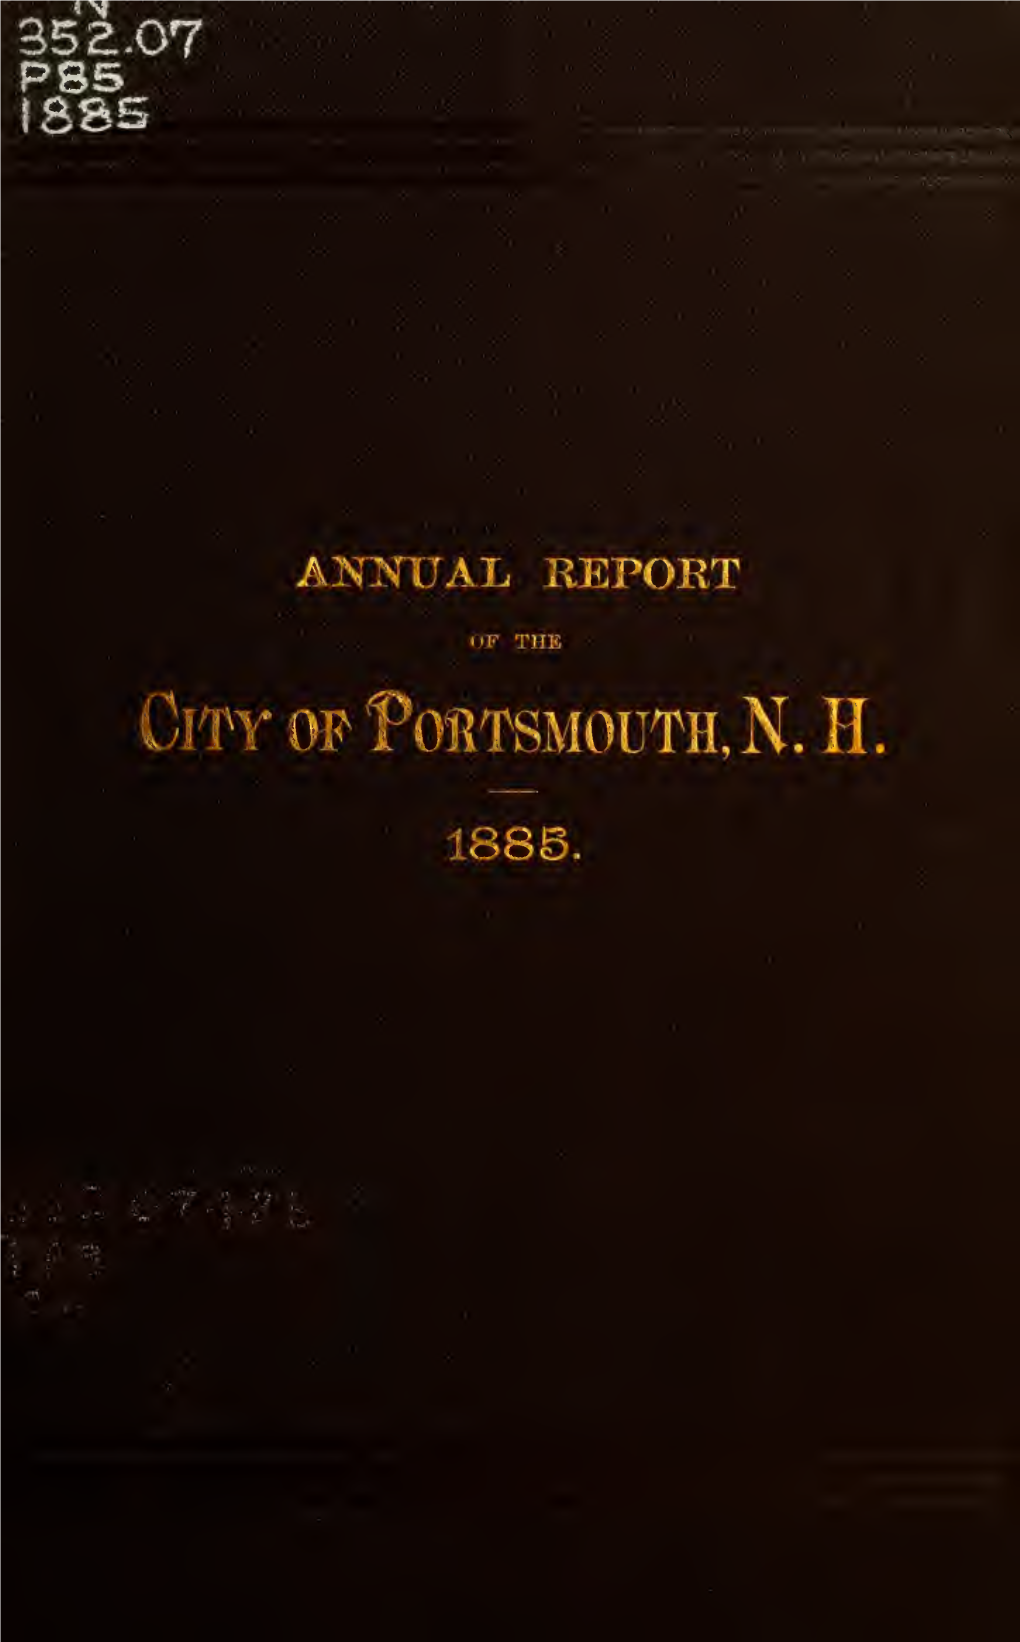 Receipts and Expenditures of the City of Portsmouth, for the Year